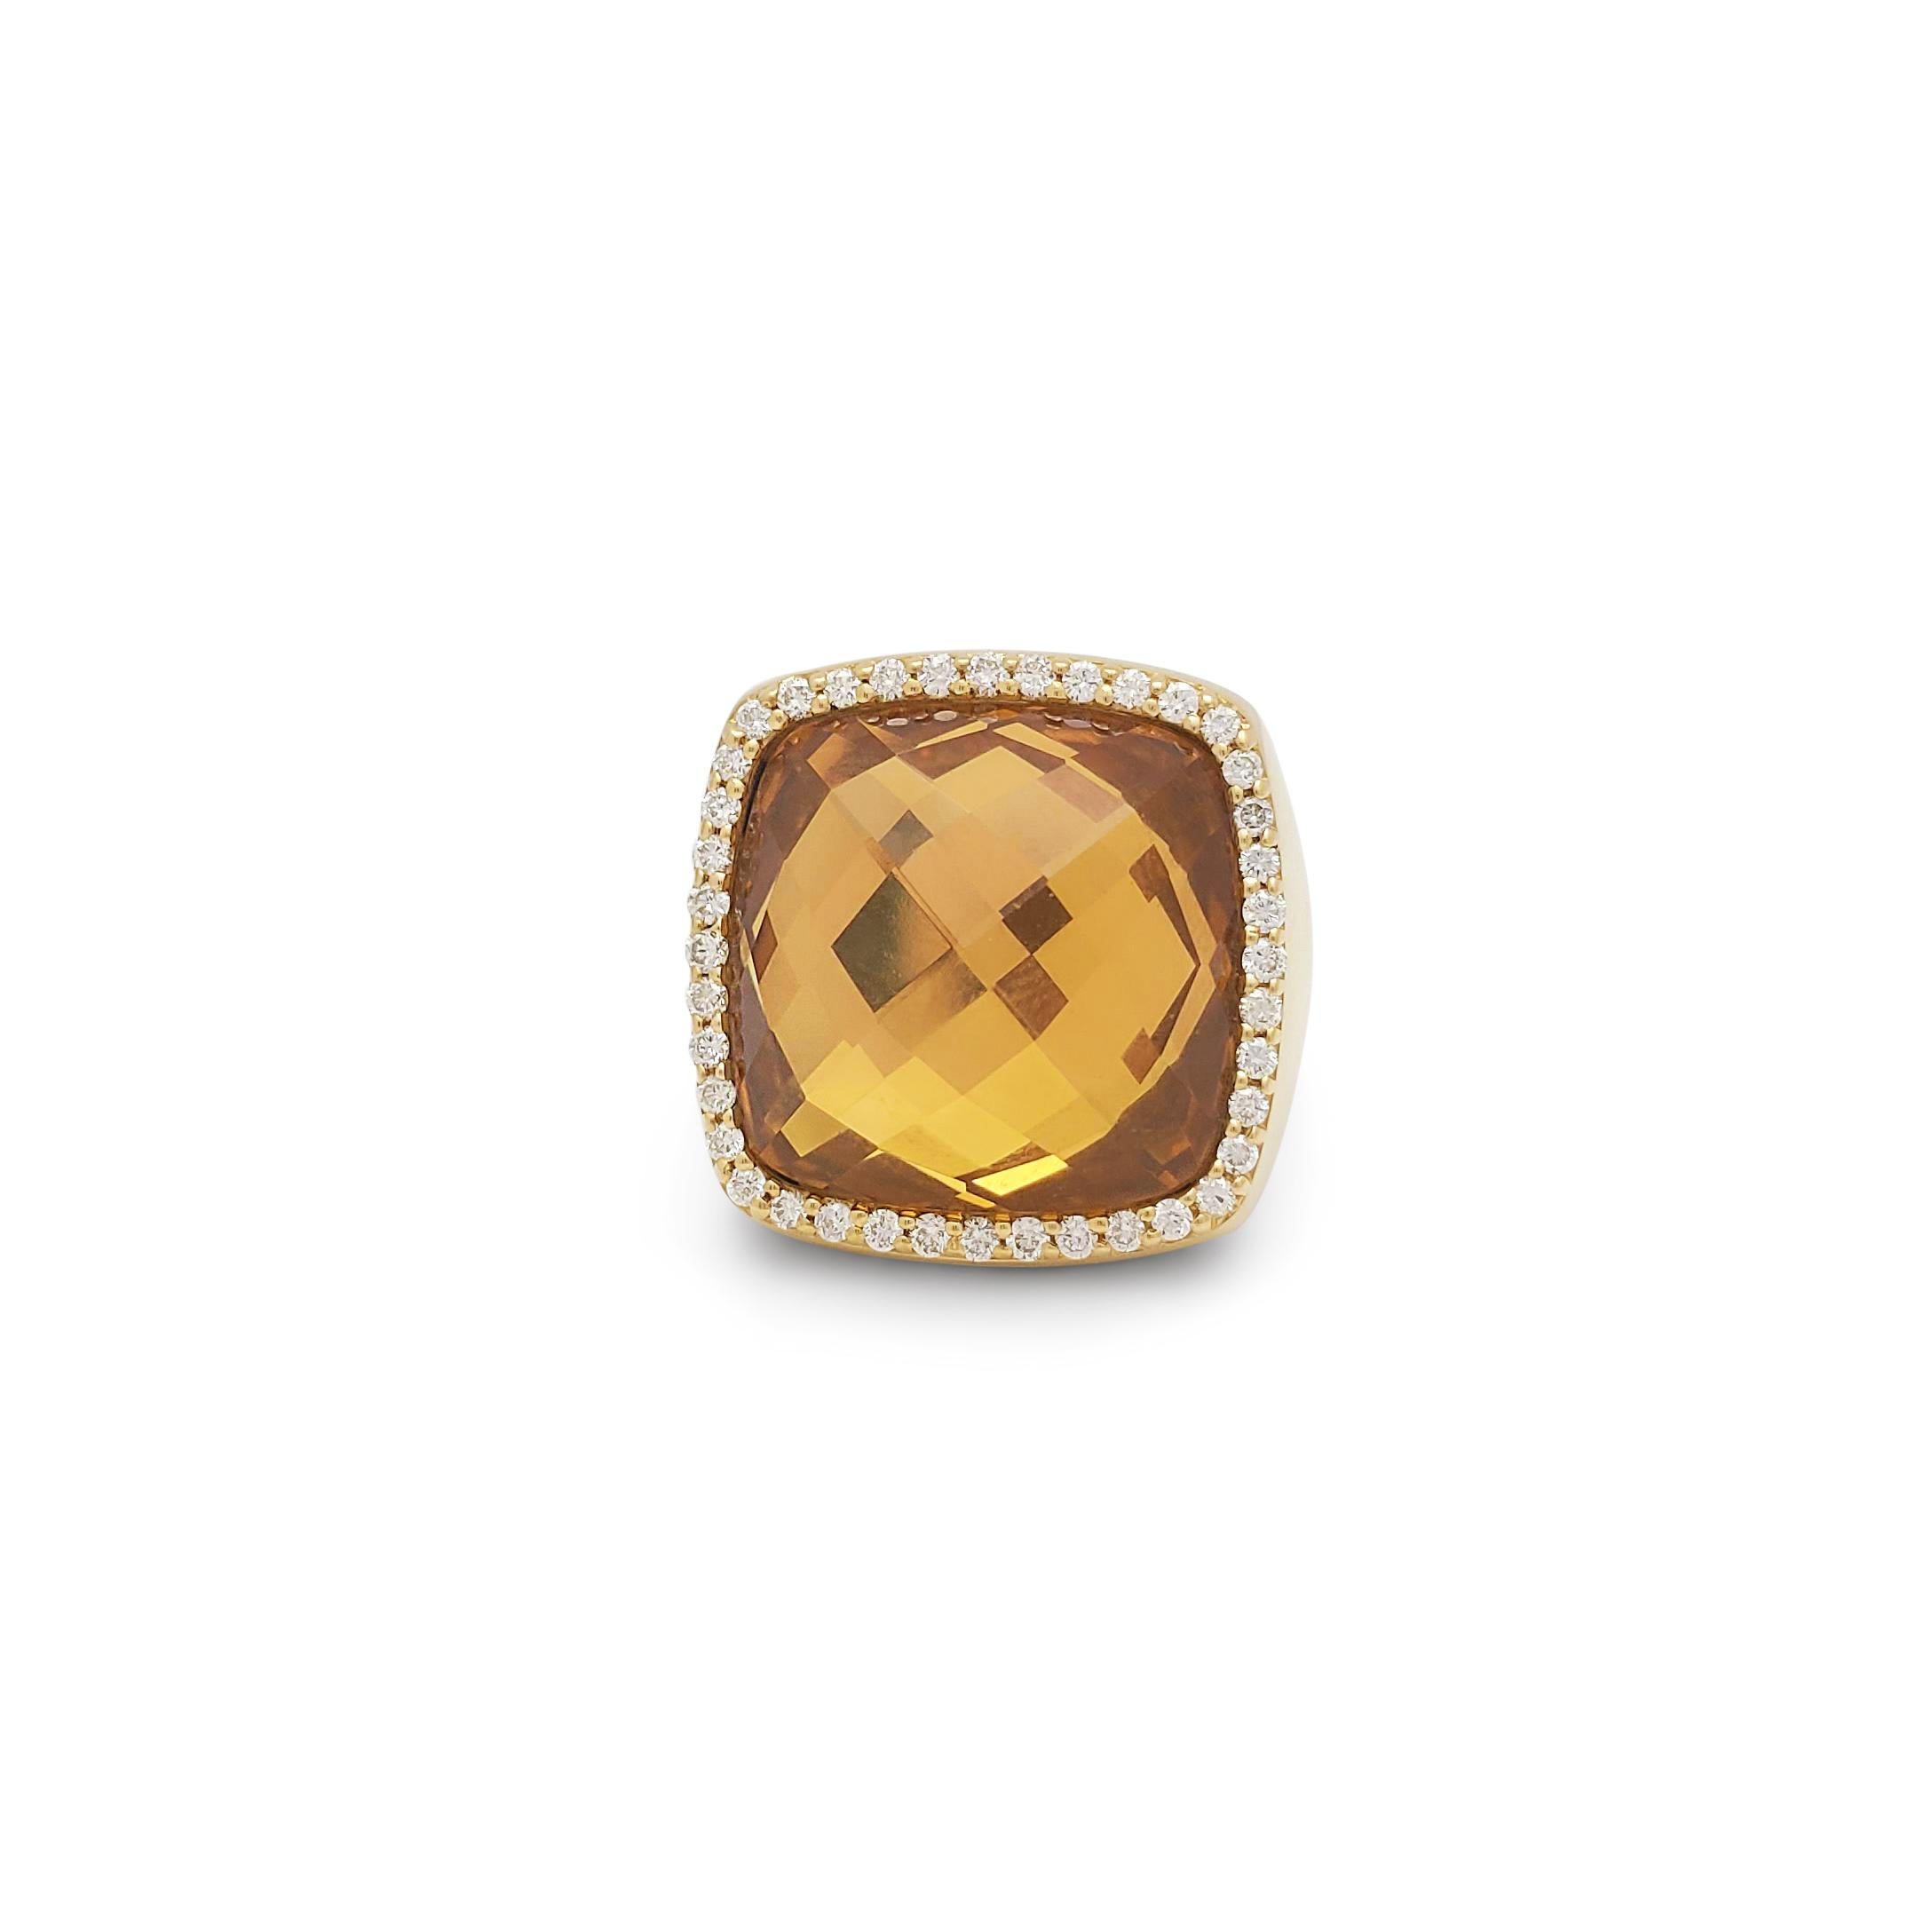 Authentic Roberto Coin cocktail ring crafted in 18 karat yellow gold.  The ring centers on a cushion cut citrine of approximately 8 carats that is framed by round cut diamonds weighing an estimated .40 carats total.  Size 6 1/2.  Signed Roberto